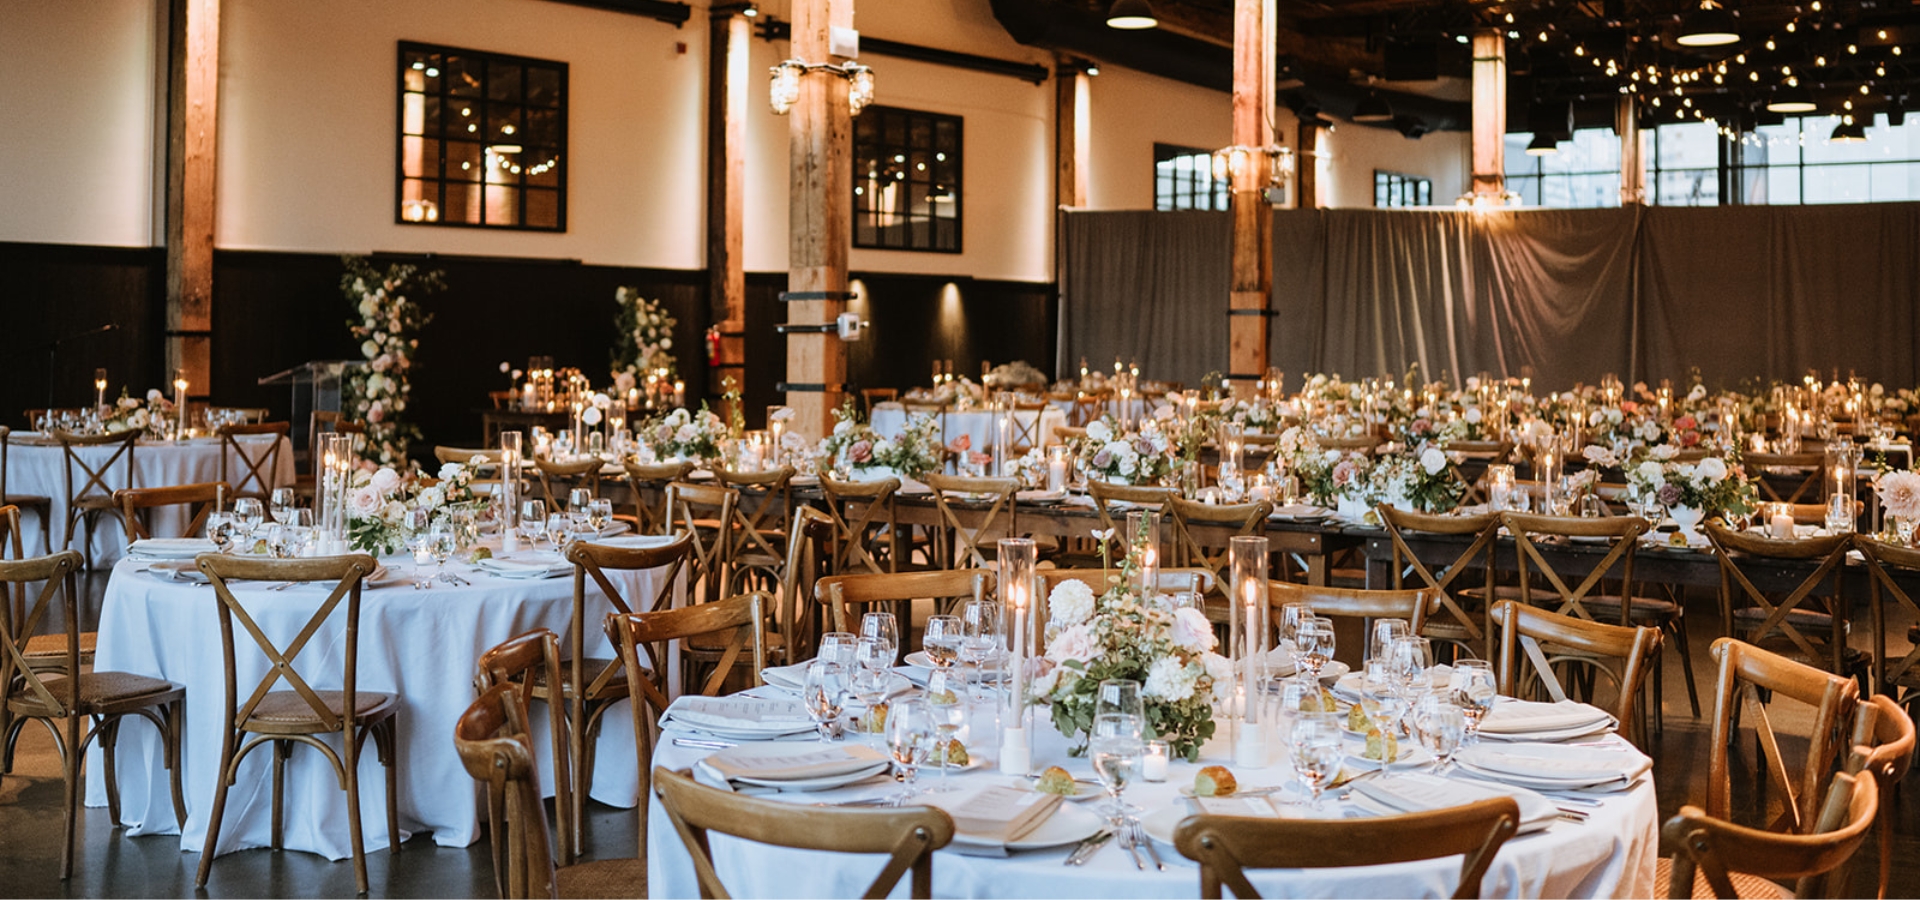 Hero image for Courtney and William’s Warm Rustic Wedding at Steam Whistle Brewery